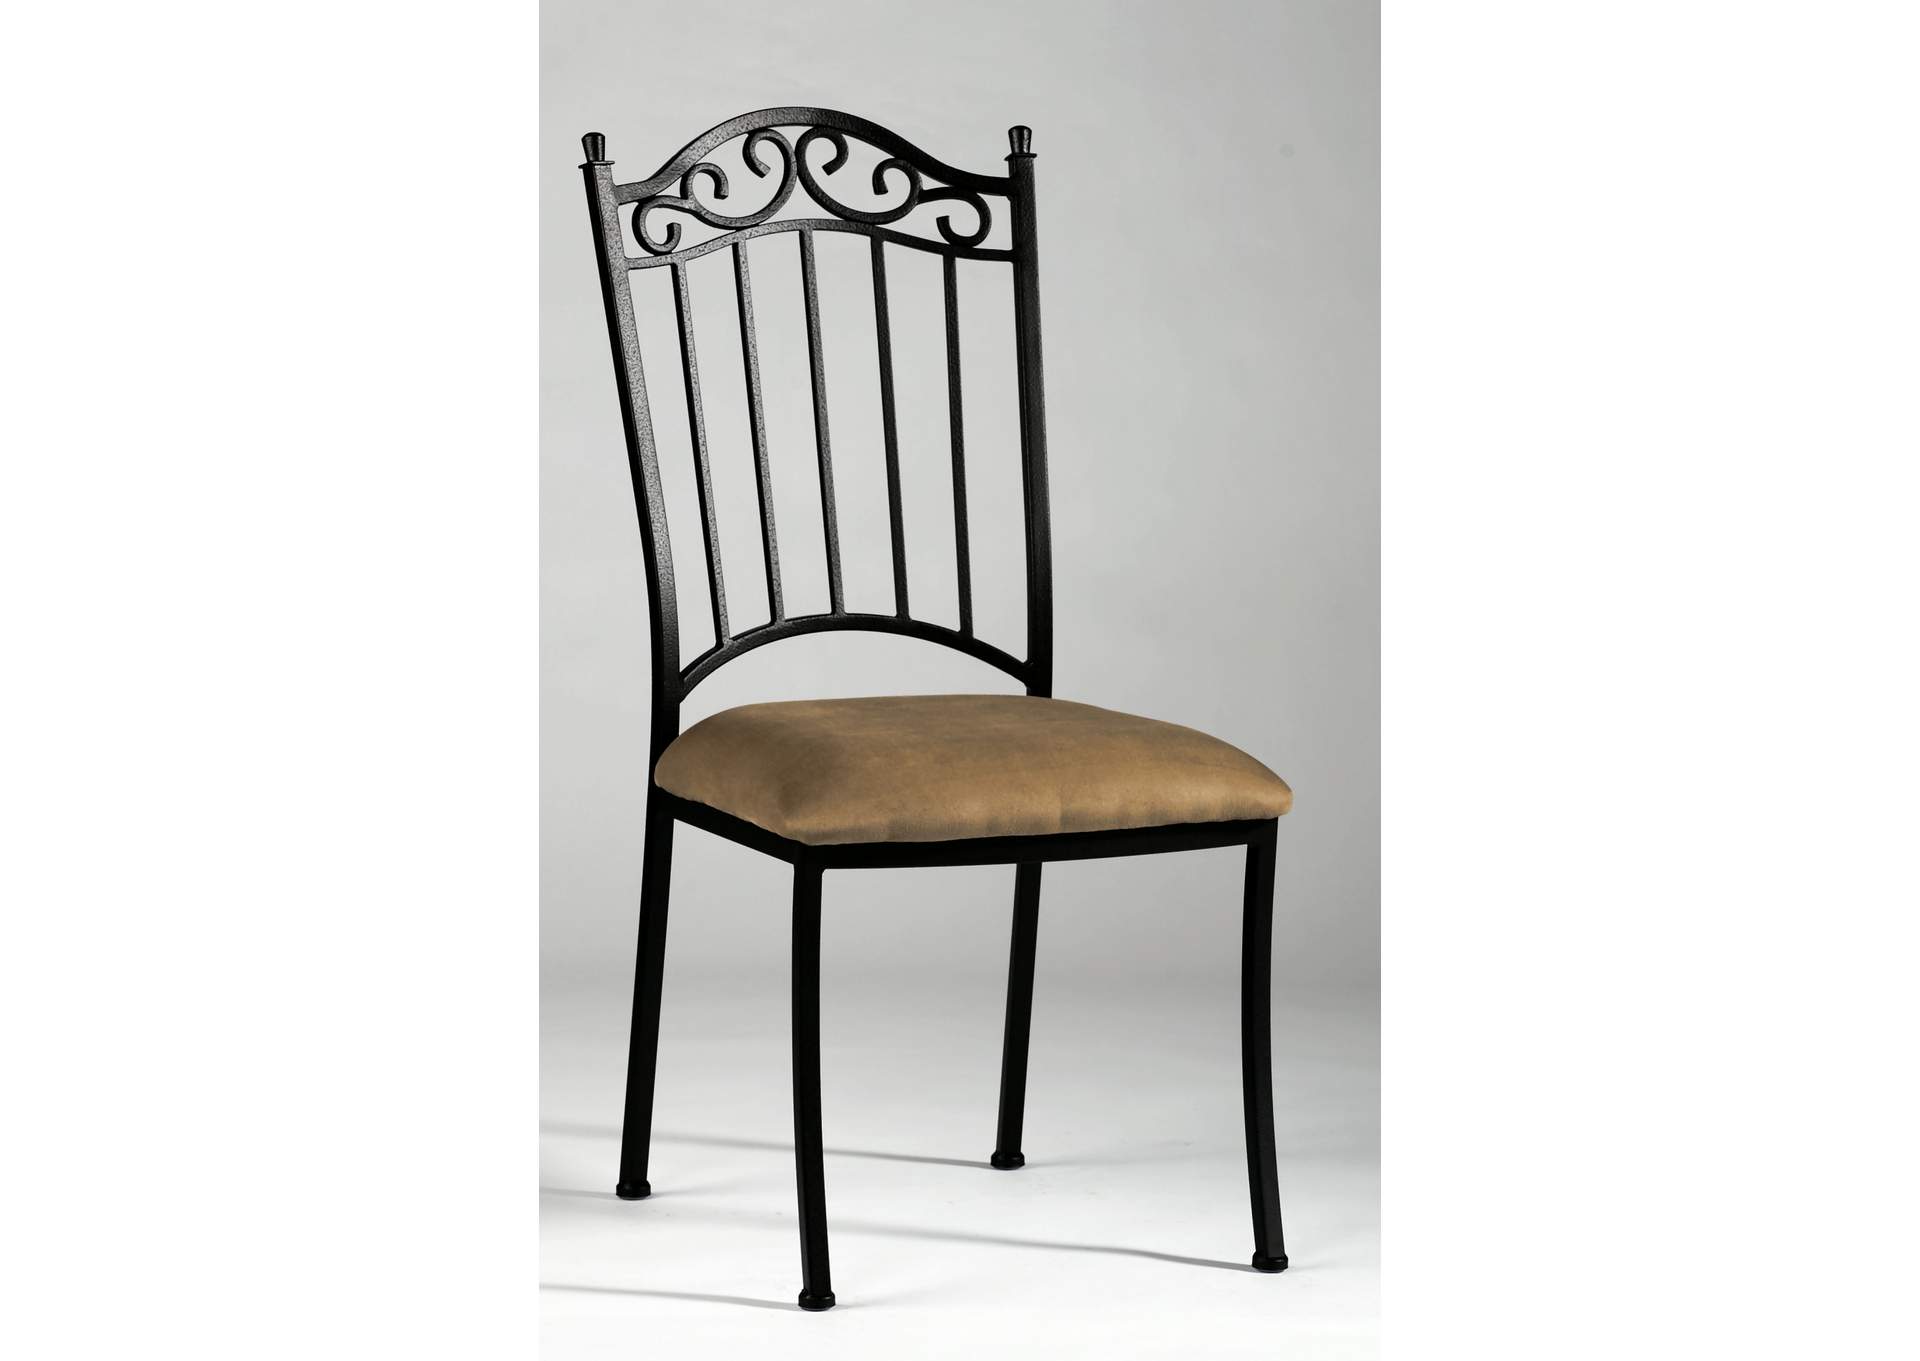 Transitional Style Dining Set with Wrought Iron Glass Table & Chairs,Chintaly Imports